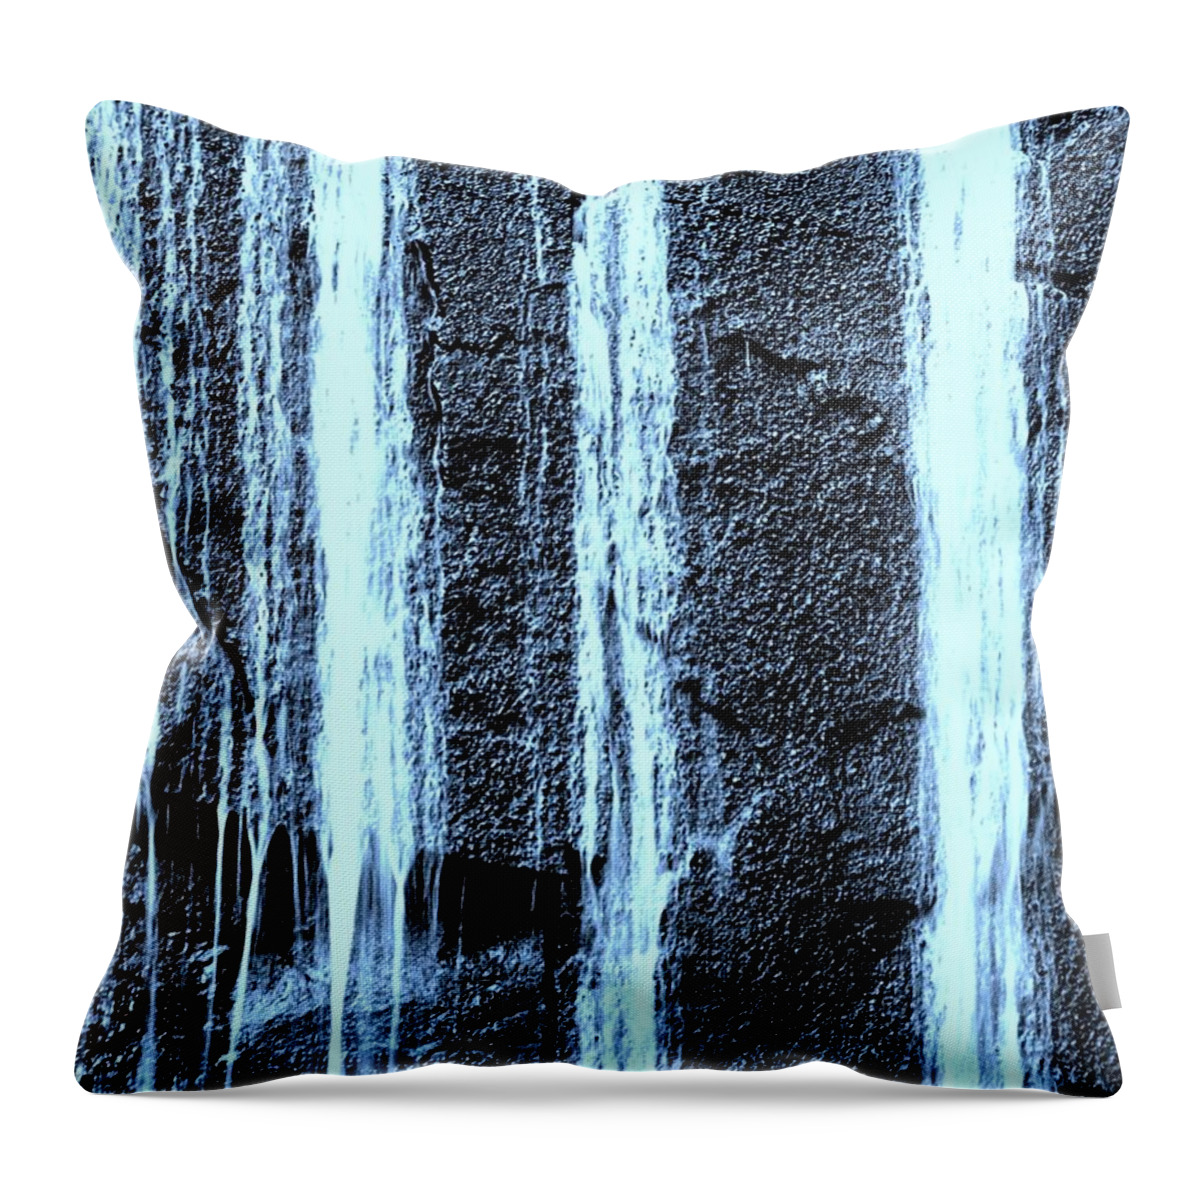 Digital Color Photo Throw Pillow featuring the digital art Australian Waterfall 2 by Tim Richards